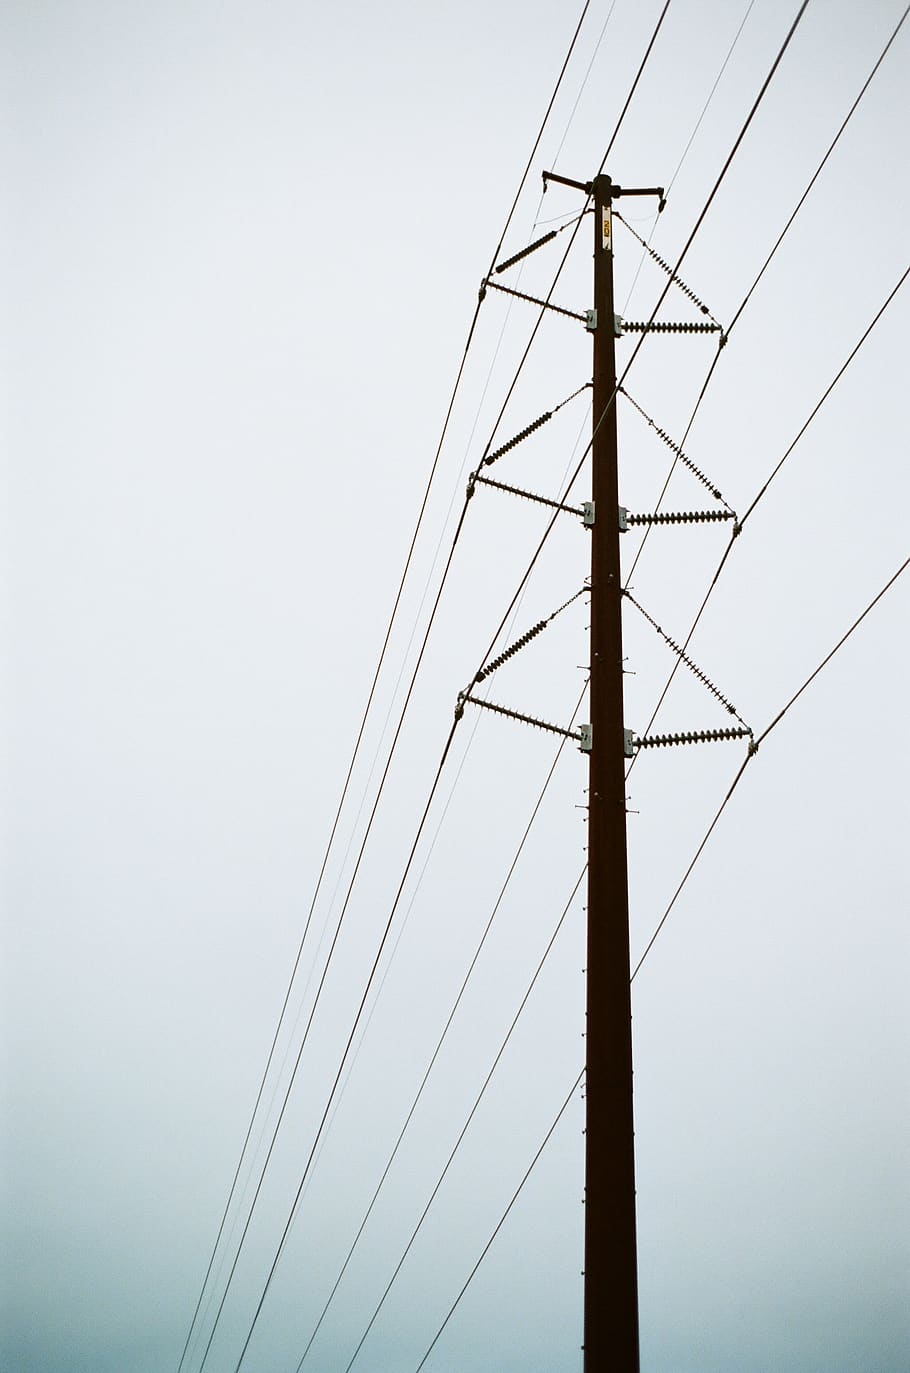 black street post at daytime, utility pole, cable, power lines